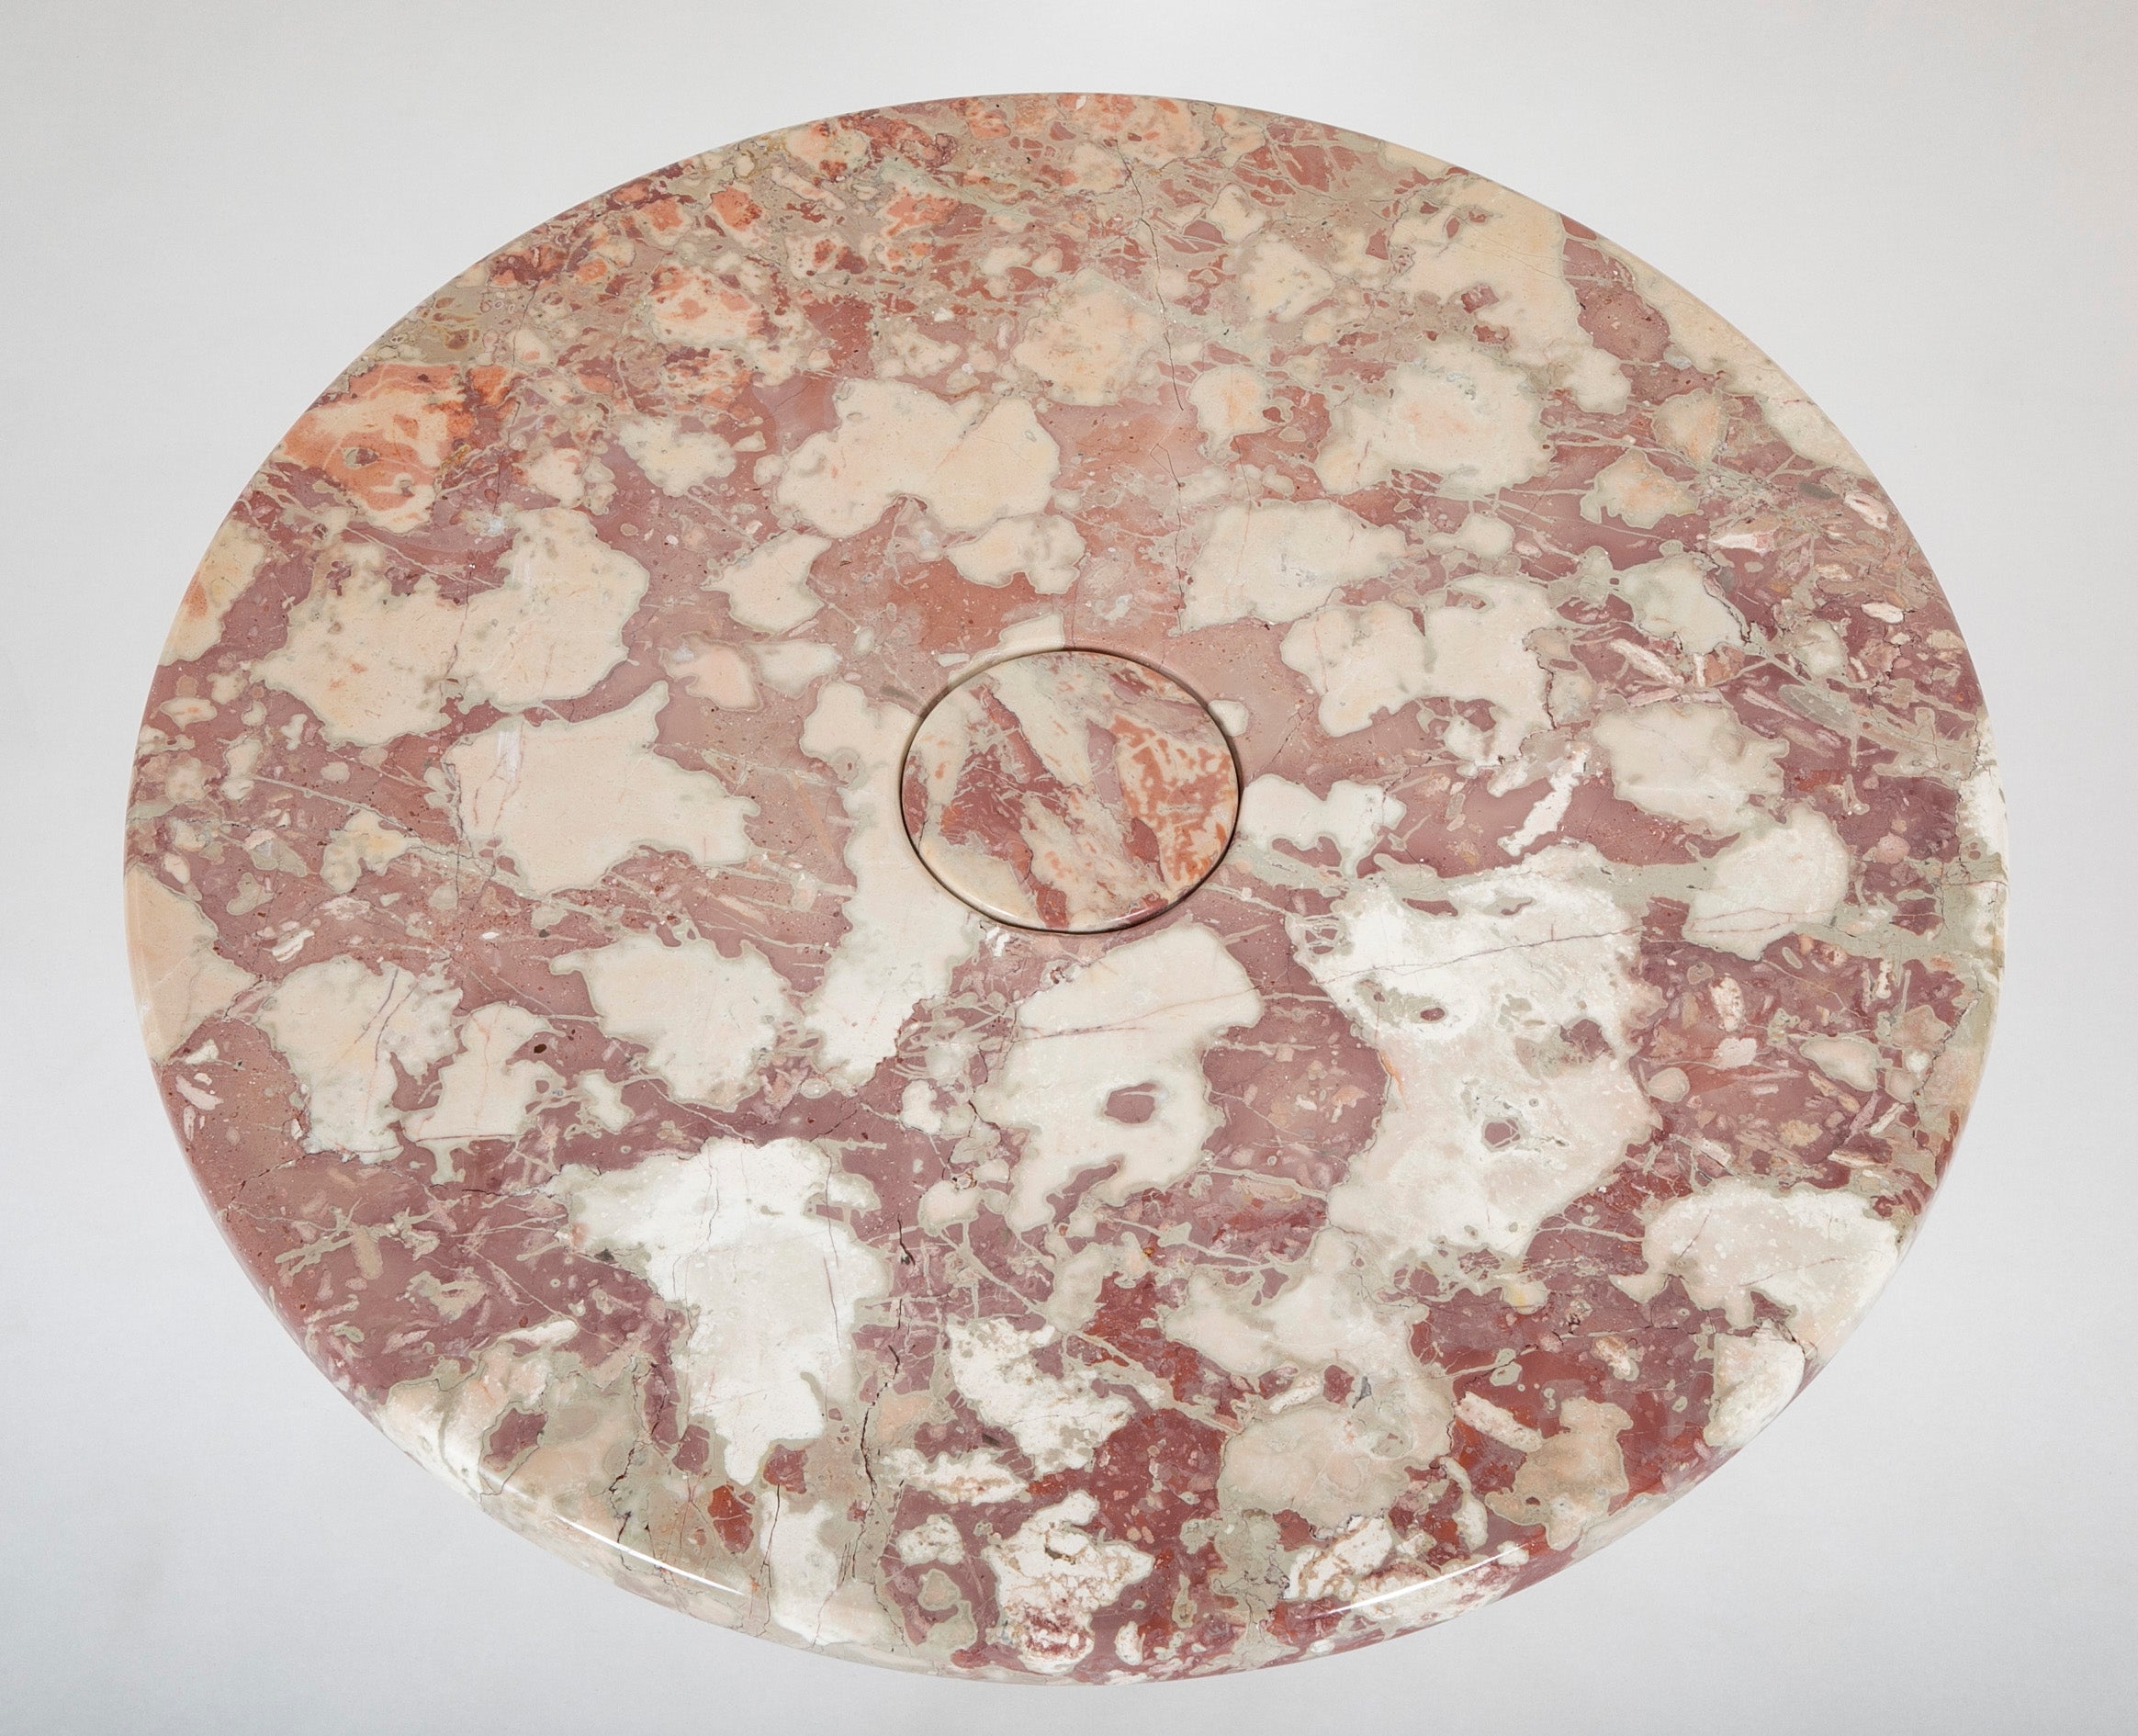 Angelo Mangiarotti "Eros" Table in Salmon Colored Marble